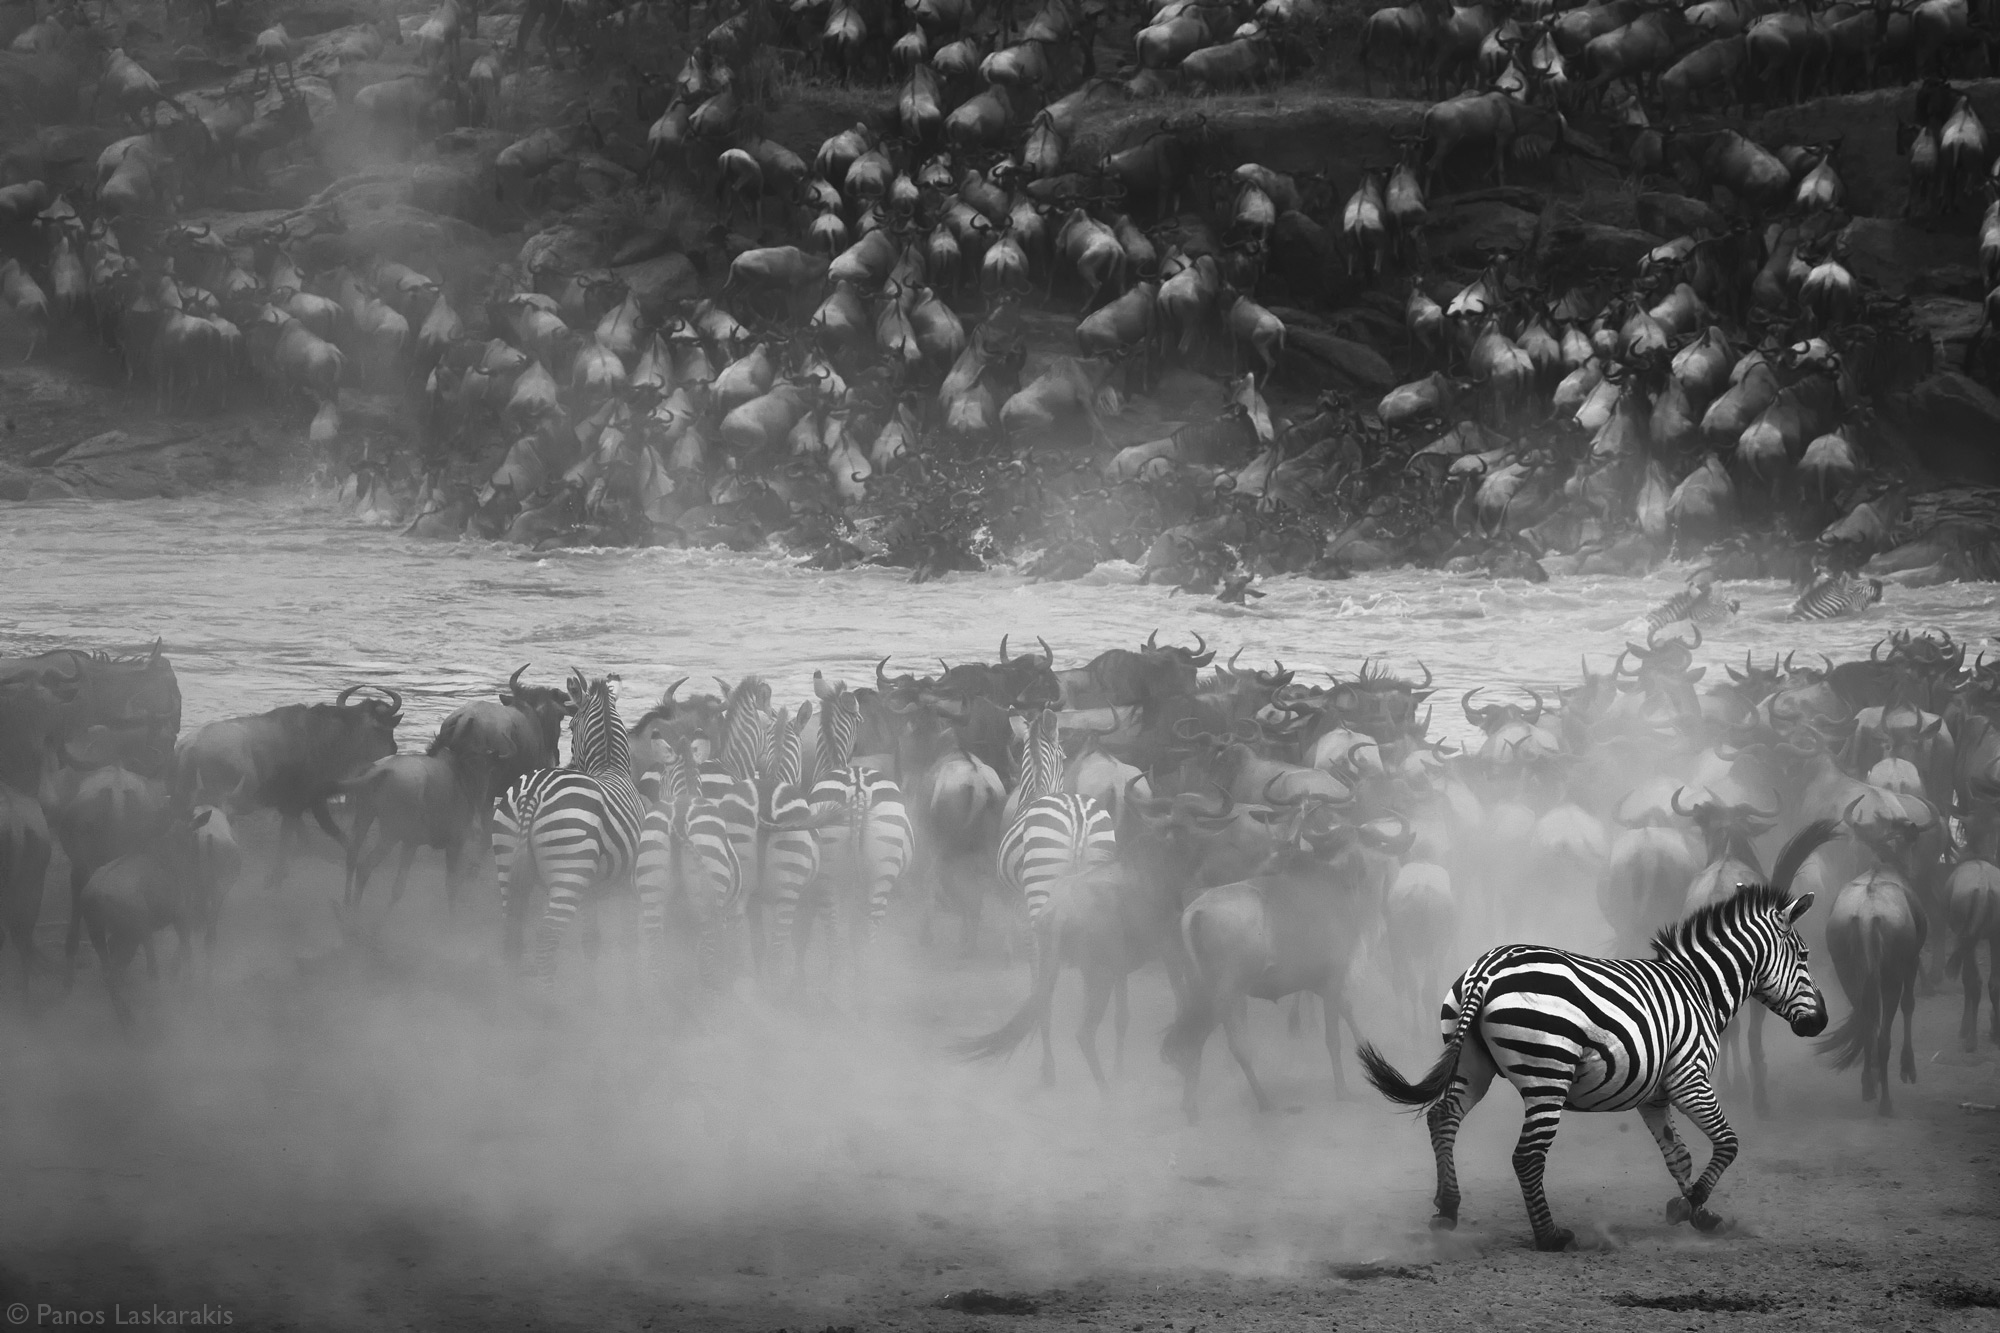 Wildbeest and zebras at the Mara River crossing in Kenya